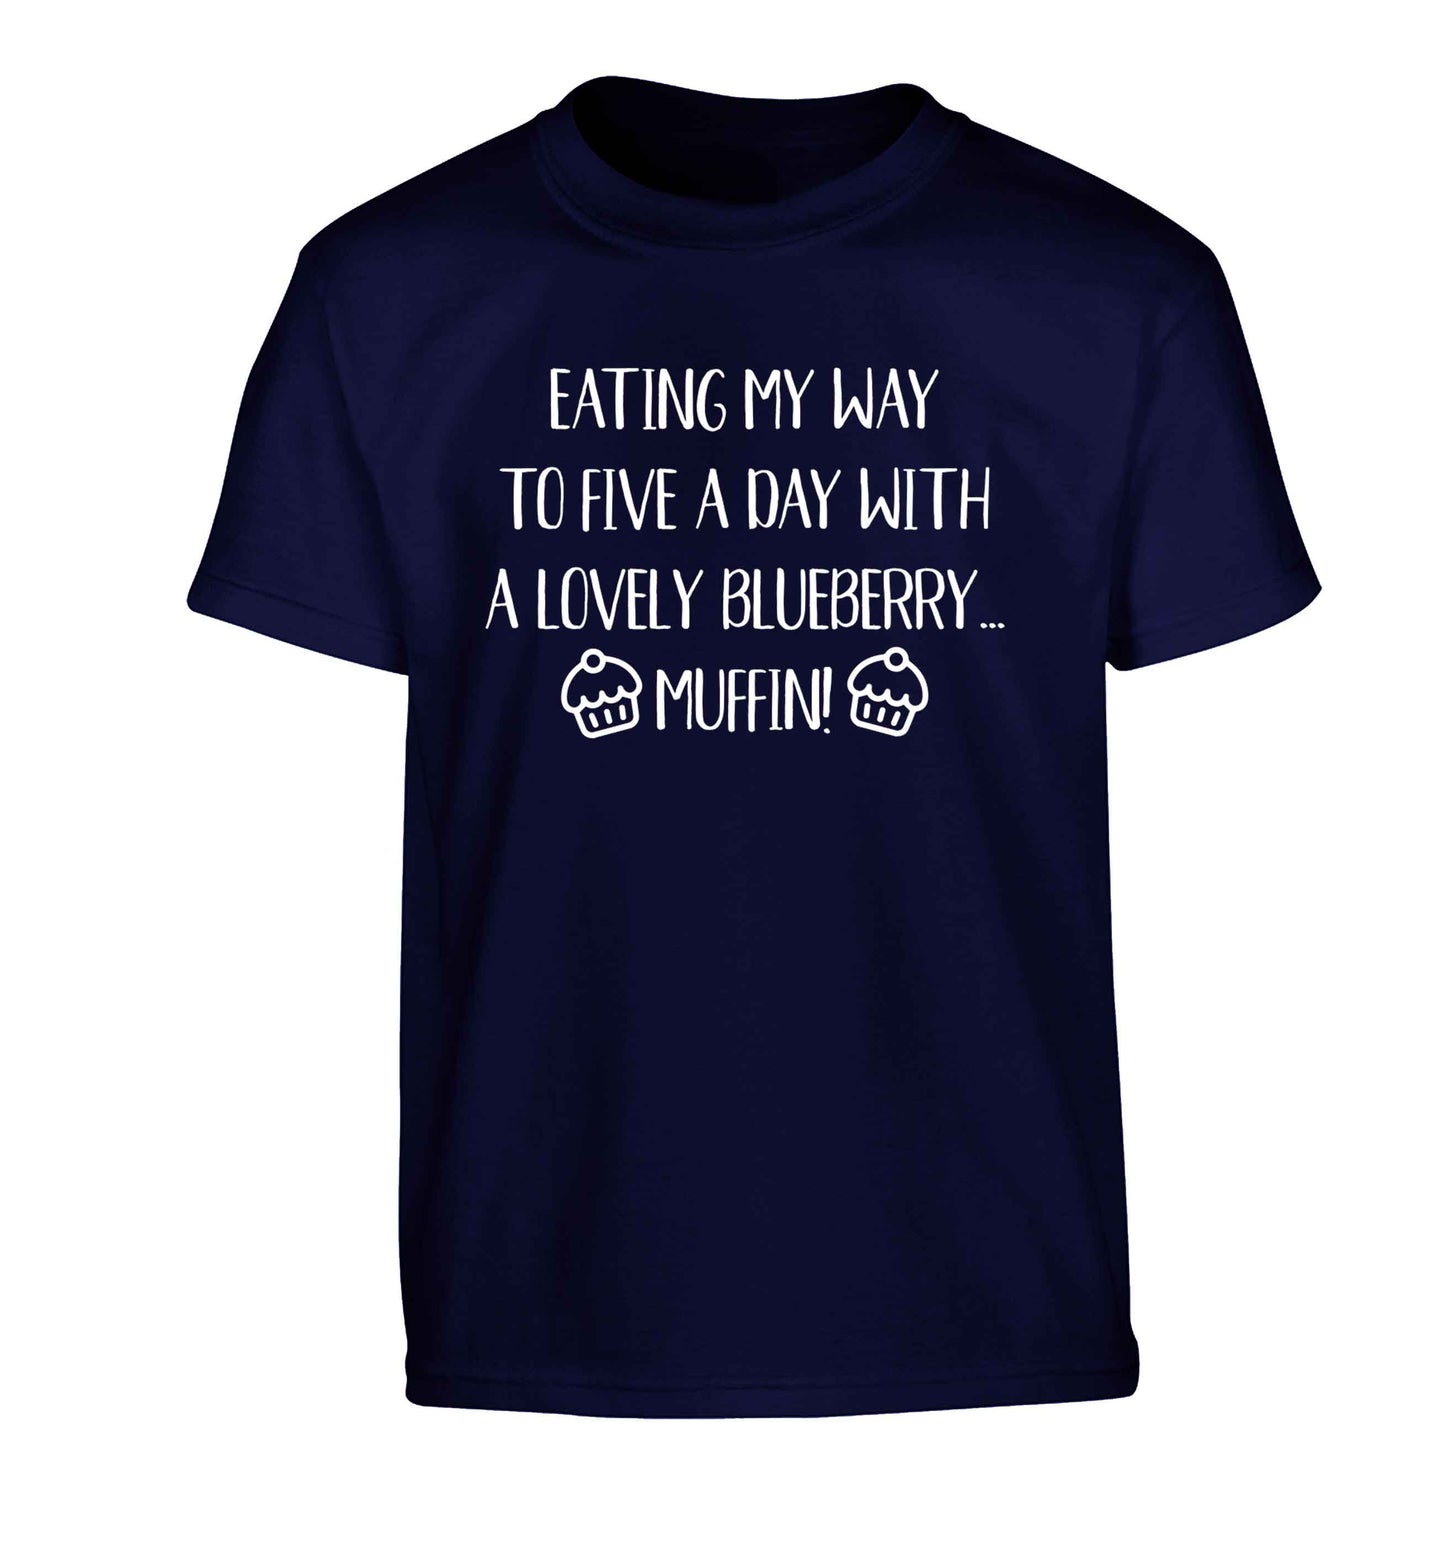 Eating my way to five a day with a lovely blueberry muffin Children's navy Tshirt 12-13 Years